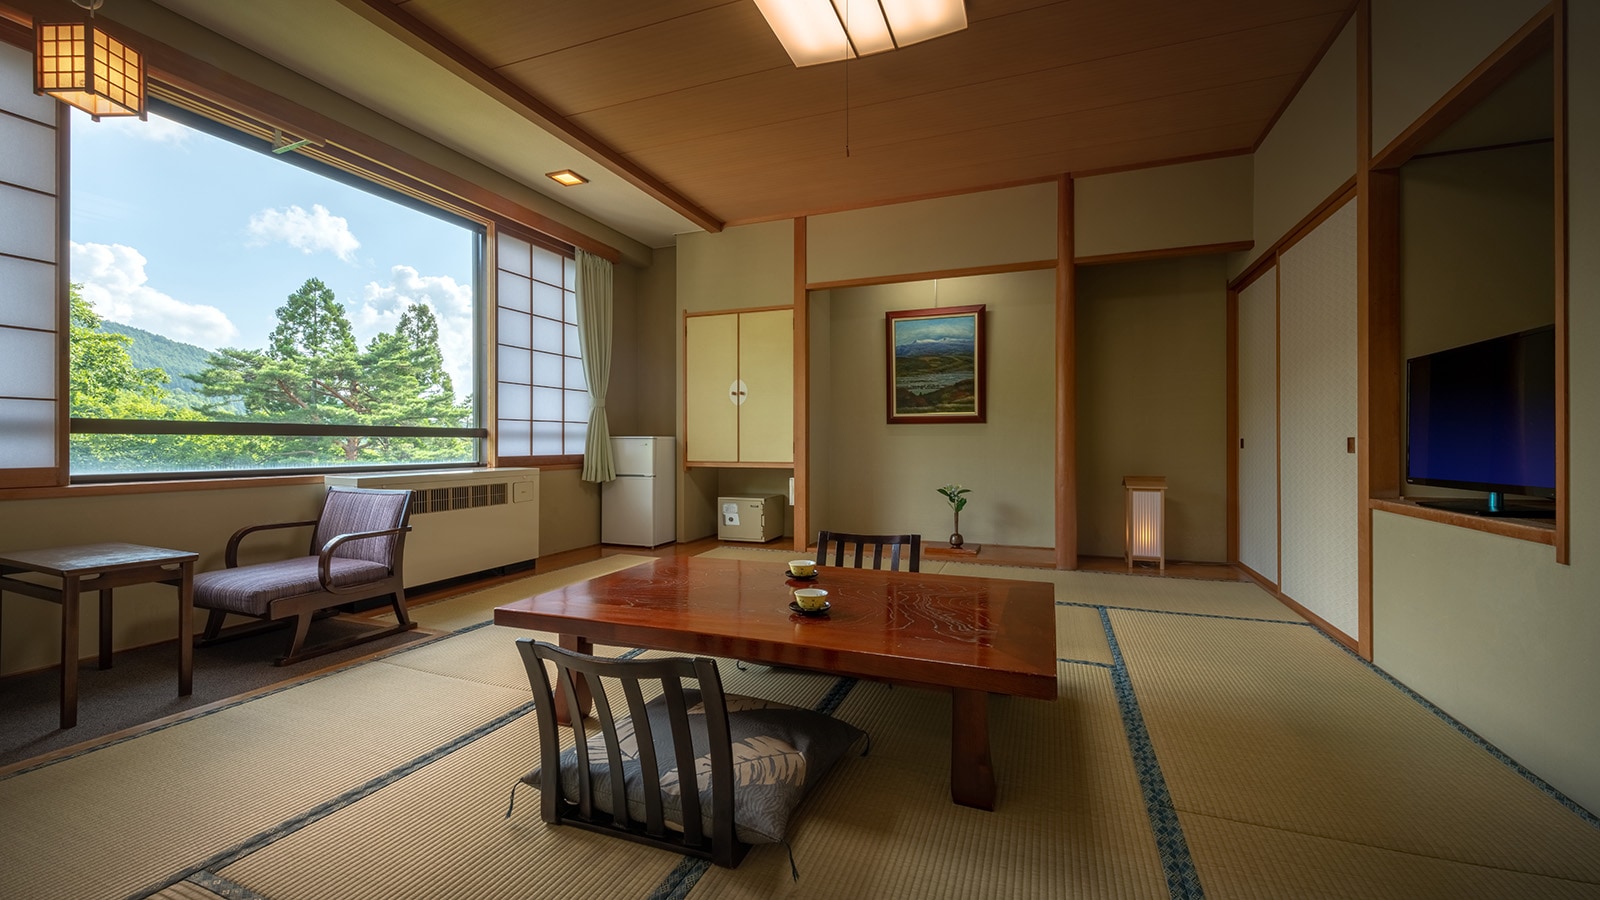 ■ Japanese-style room where you can enjoy the nature of Zao from the window